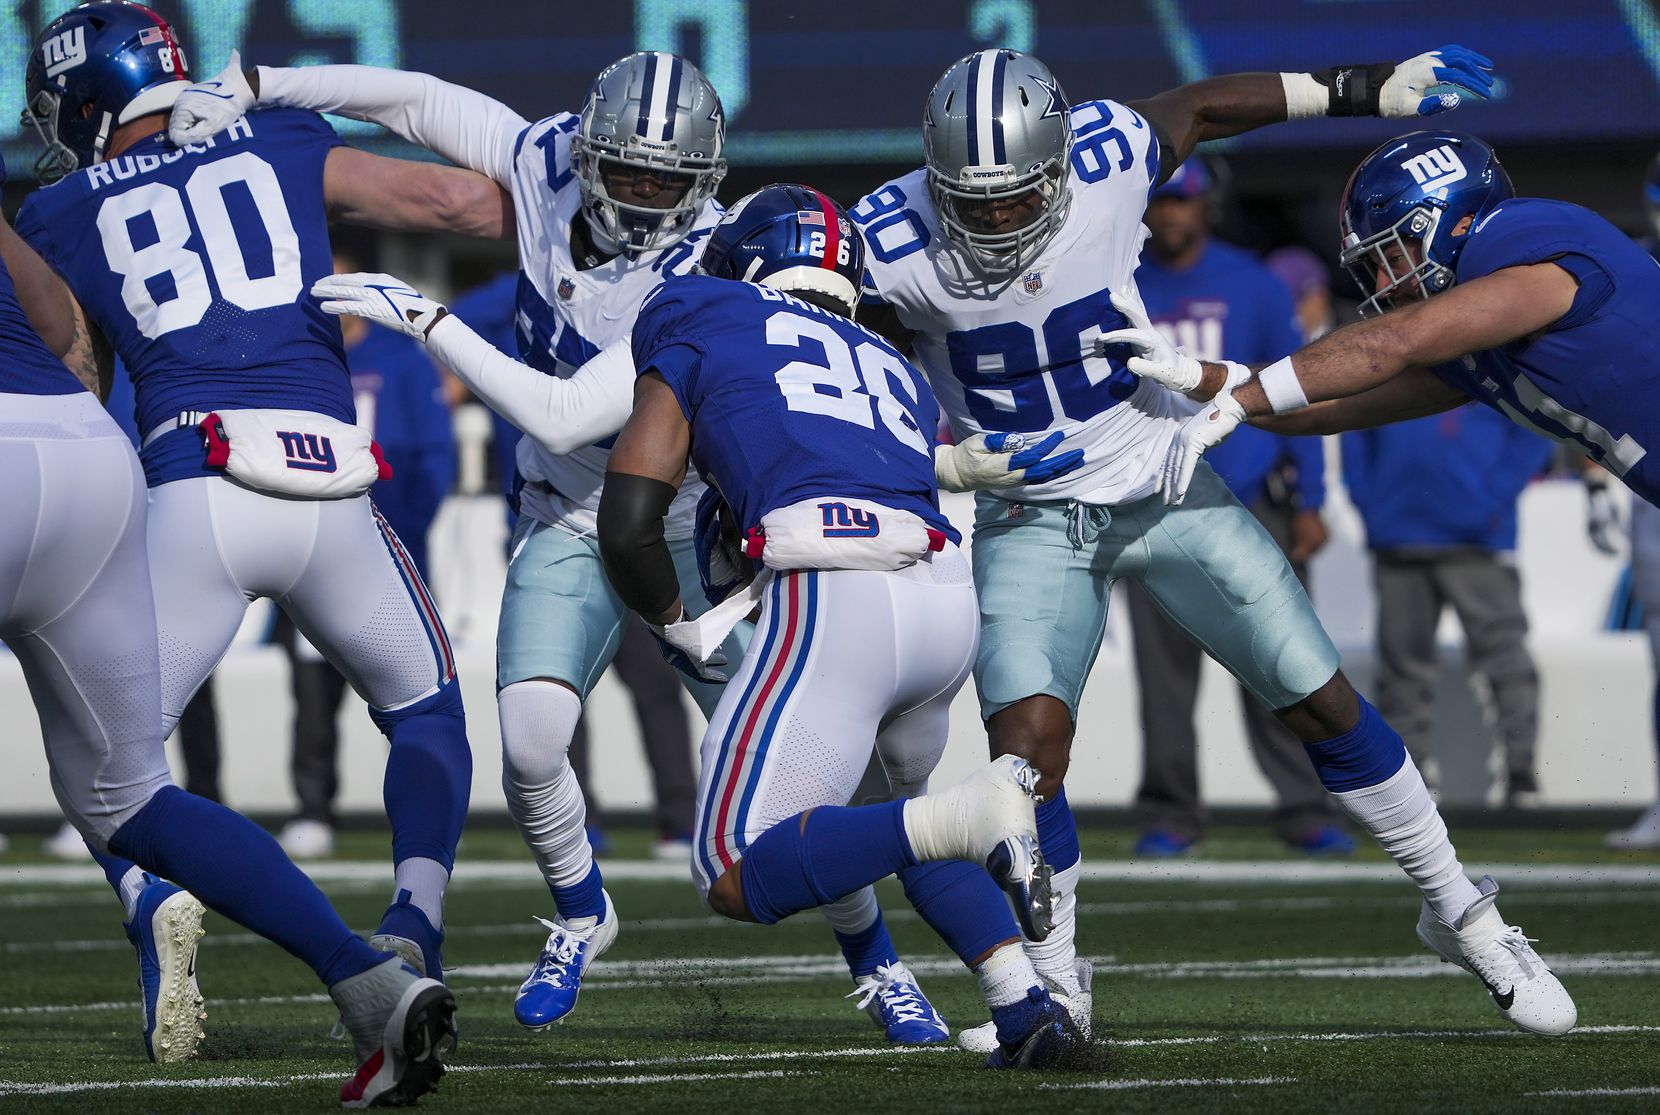 Dallas Cowboys defensive end Demarcus Lawrence (90) and safety Jayron Kearse (27) move in for a tackle on New York Giants running back Saquon Barkley (26) during the first half of an NFL football game on Sunday, Dec. 19, 2021, in East Rutherford, N.J.